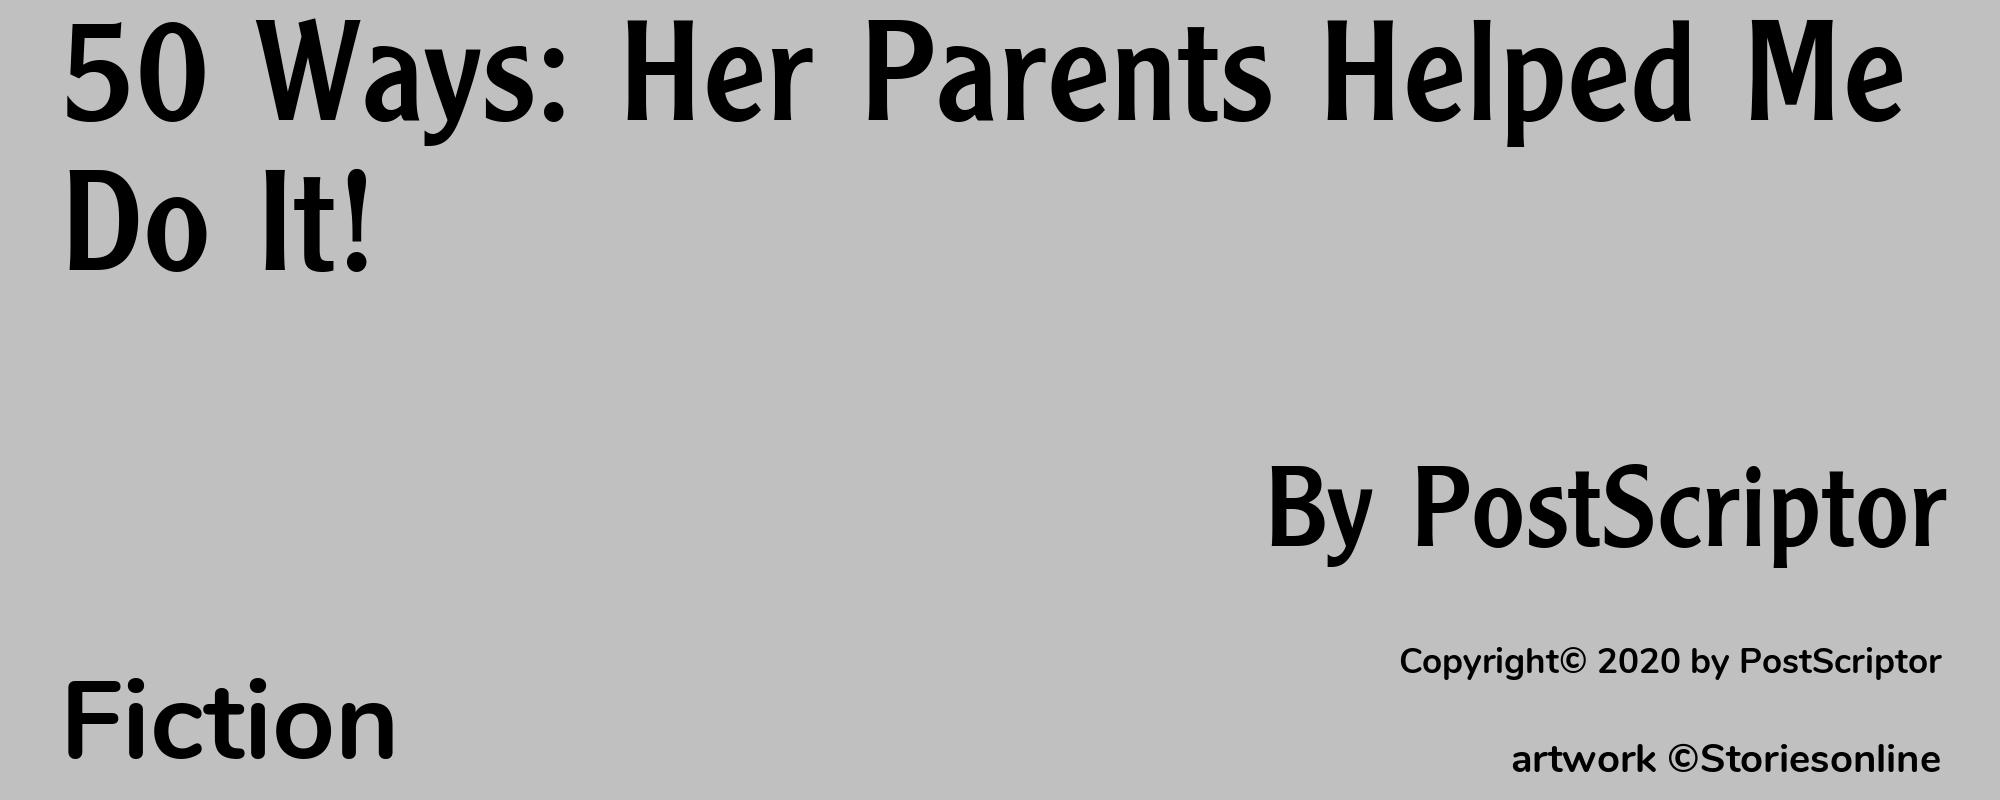 50 Ways: Her Parents Helped Me Do It! - Cover